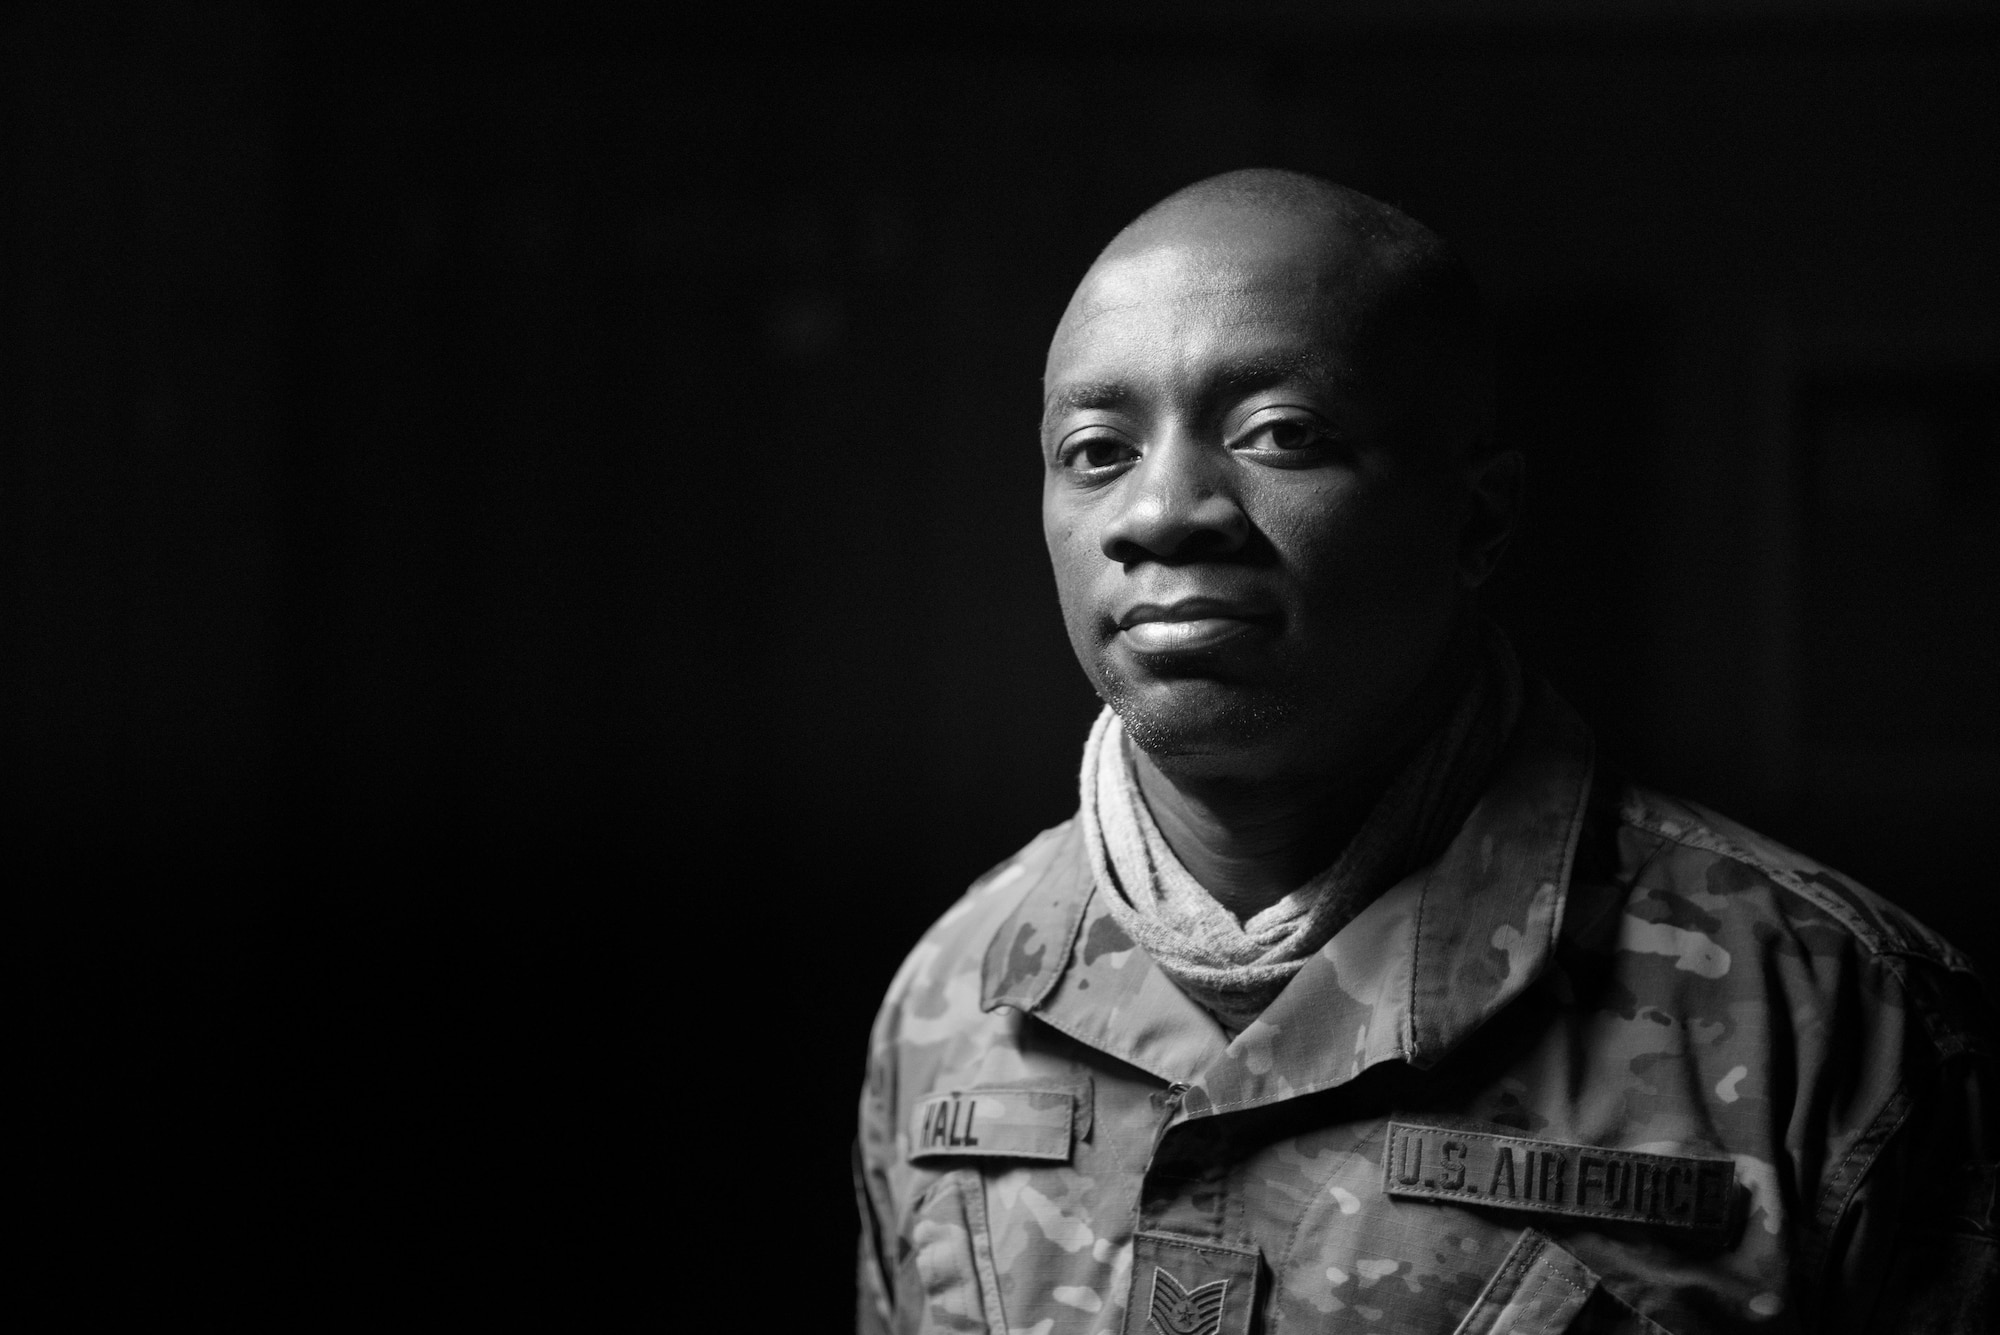 Tech. Sgt. Laughten Hall, 407th Expeditionary Security Forces Squadron, poses for a photo Feb. 13, 2017, at Al Asad Air Base, Iraq. Hall immigrated to the U.S. from Jamaica with his father. (U.S. Air Force photo/Master Sgt. Benjamin Wilson)(Released)